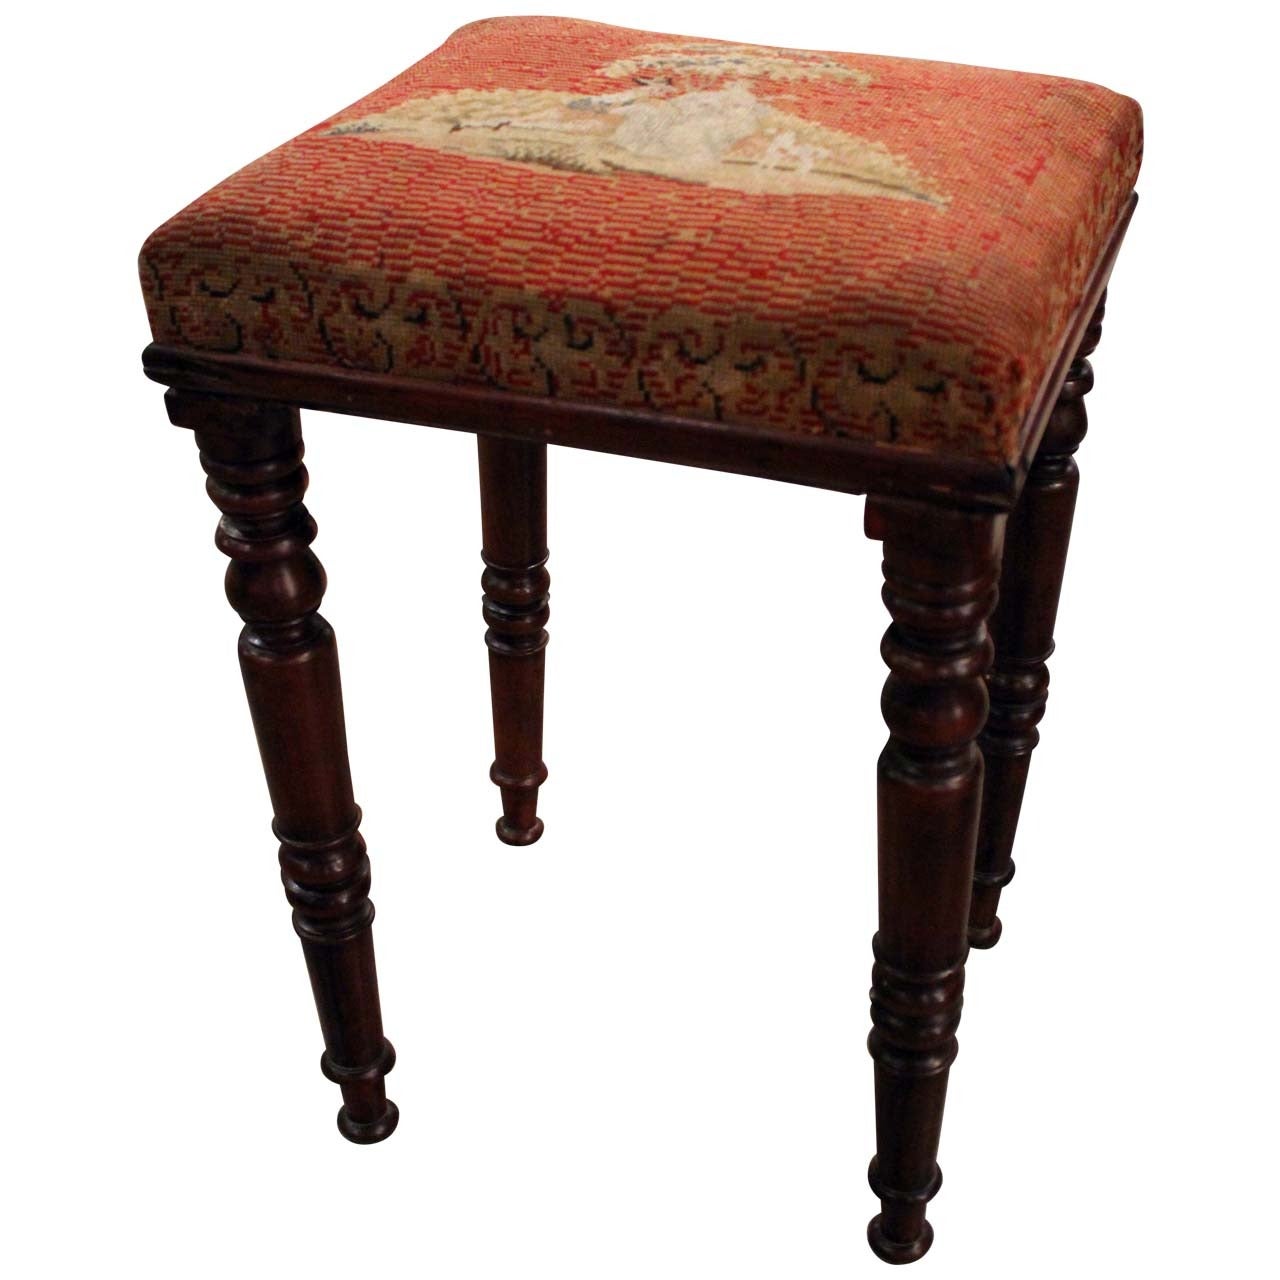 English Tall Stool For Sale